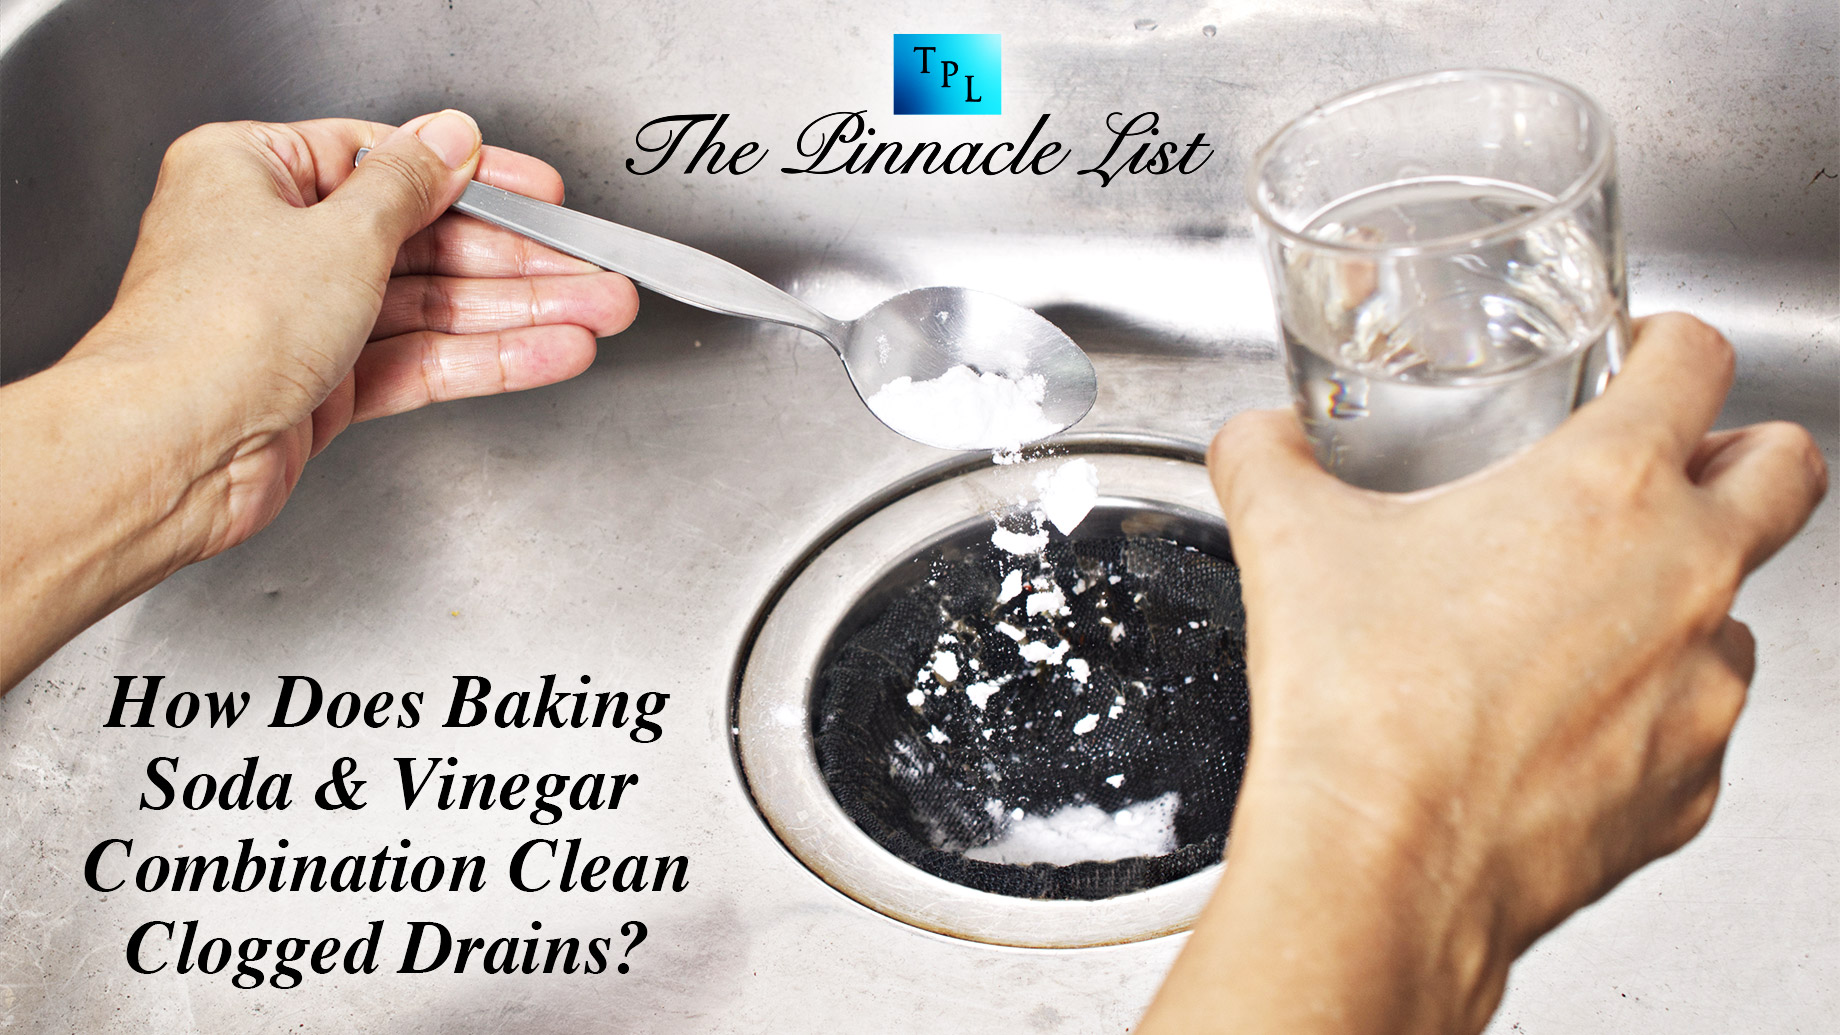 How Does Baking Soda & Vinegar Combination Clean Clogged Drains?